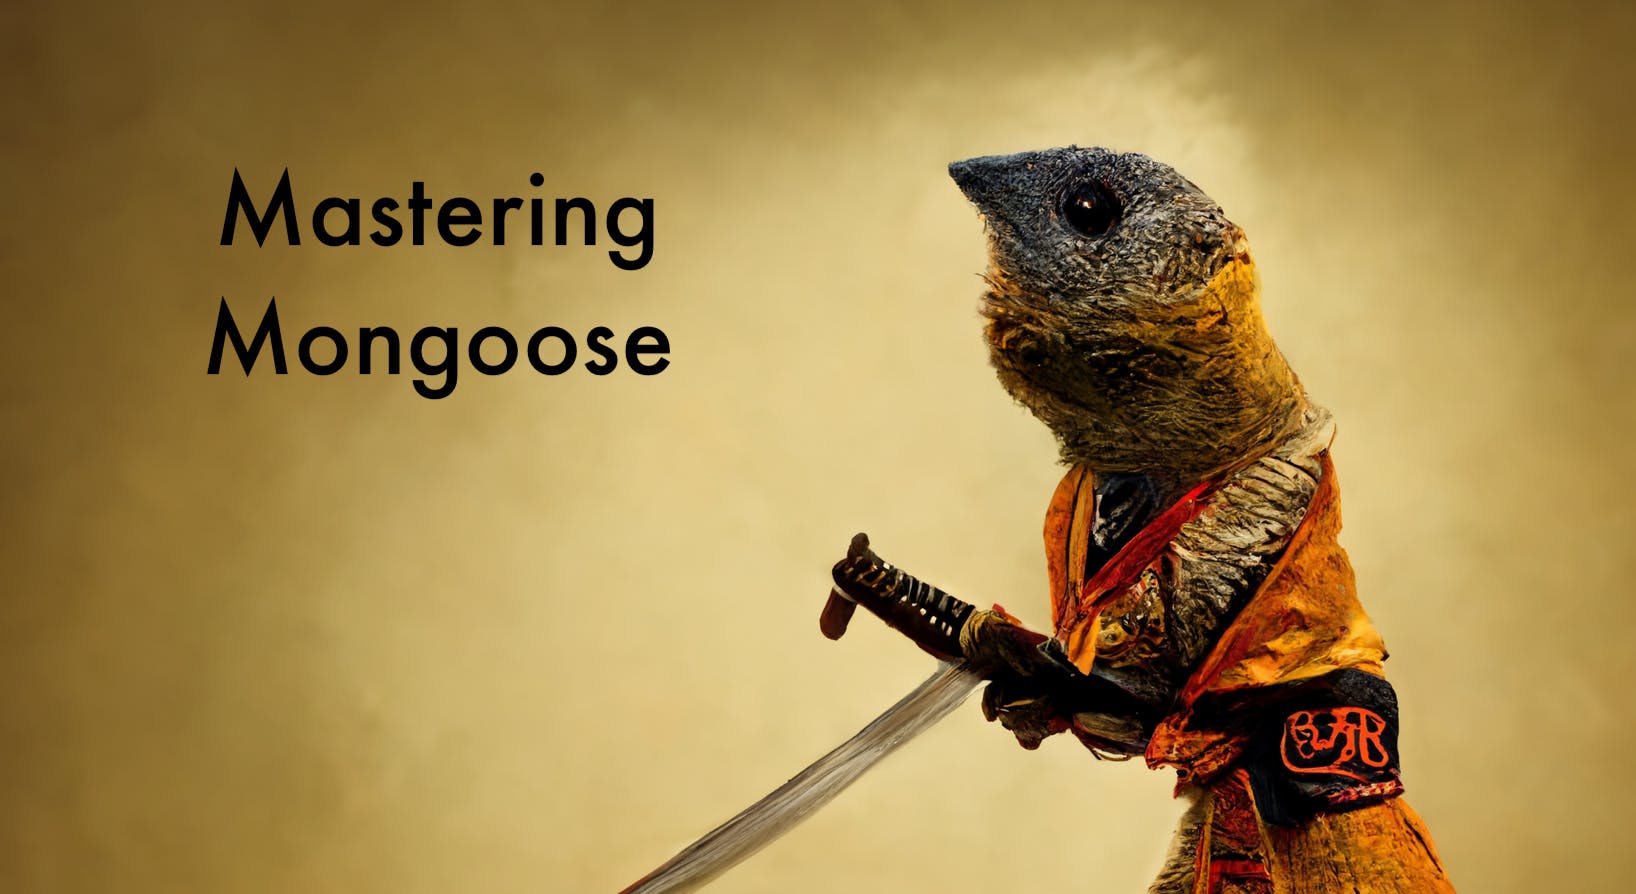 Question_Picture_of_a_mongoose_wearing_tang_suit_with_sword_on__72fbca61-d207-4546-a067-4e5d34e336b5 copy.png